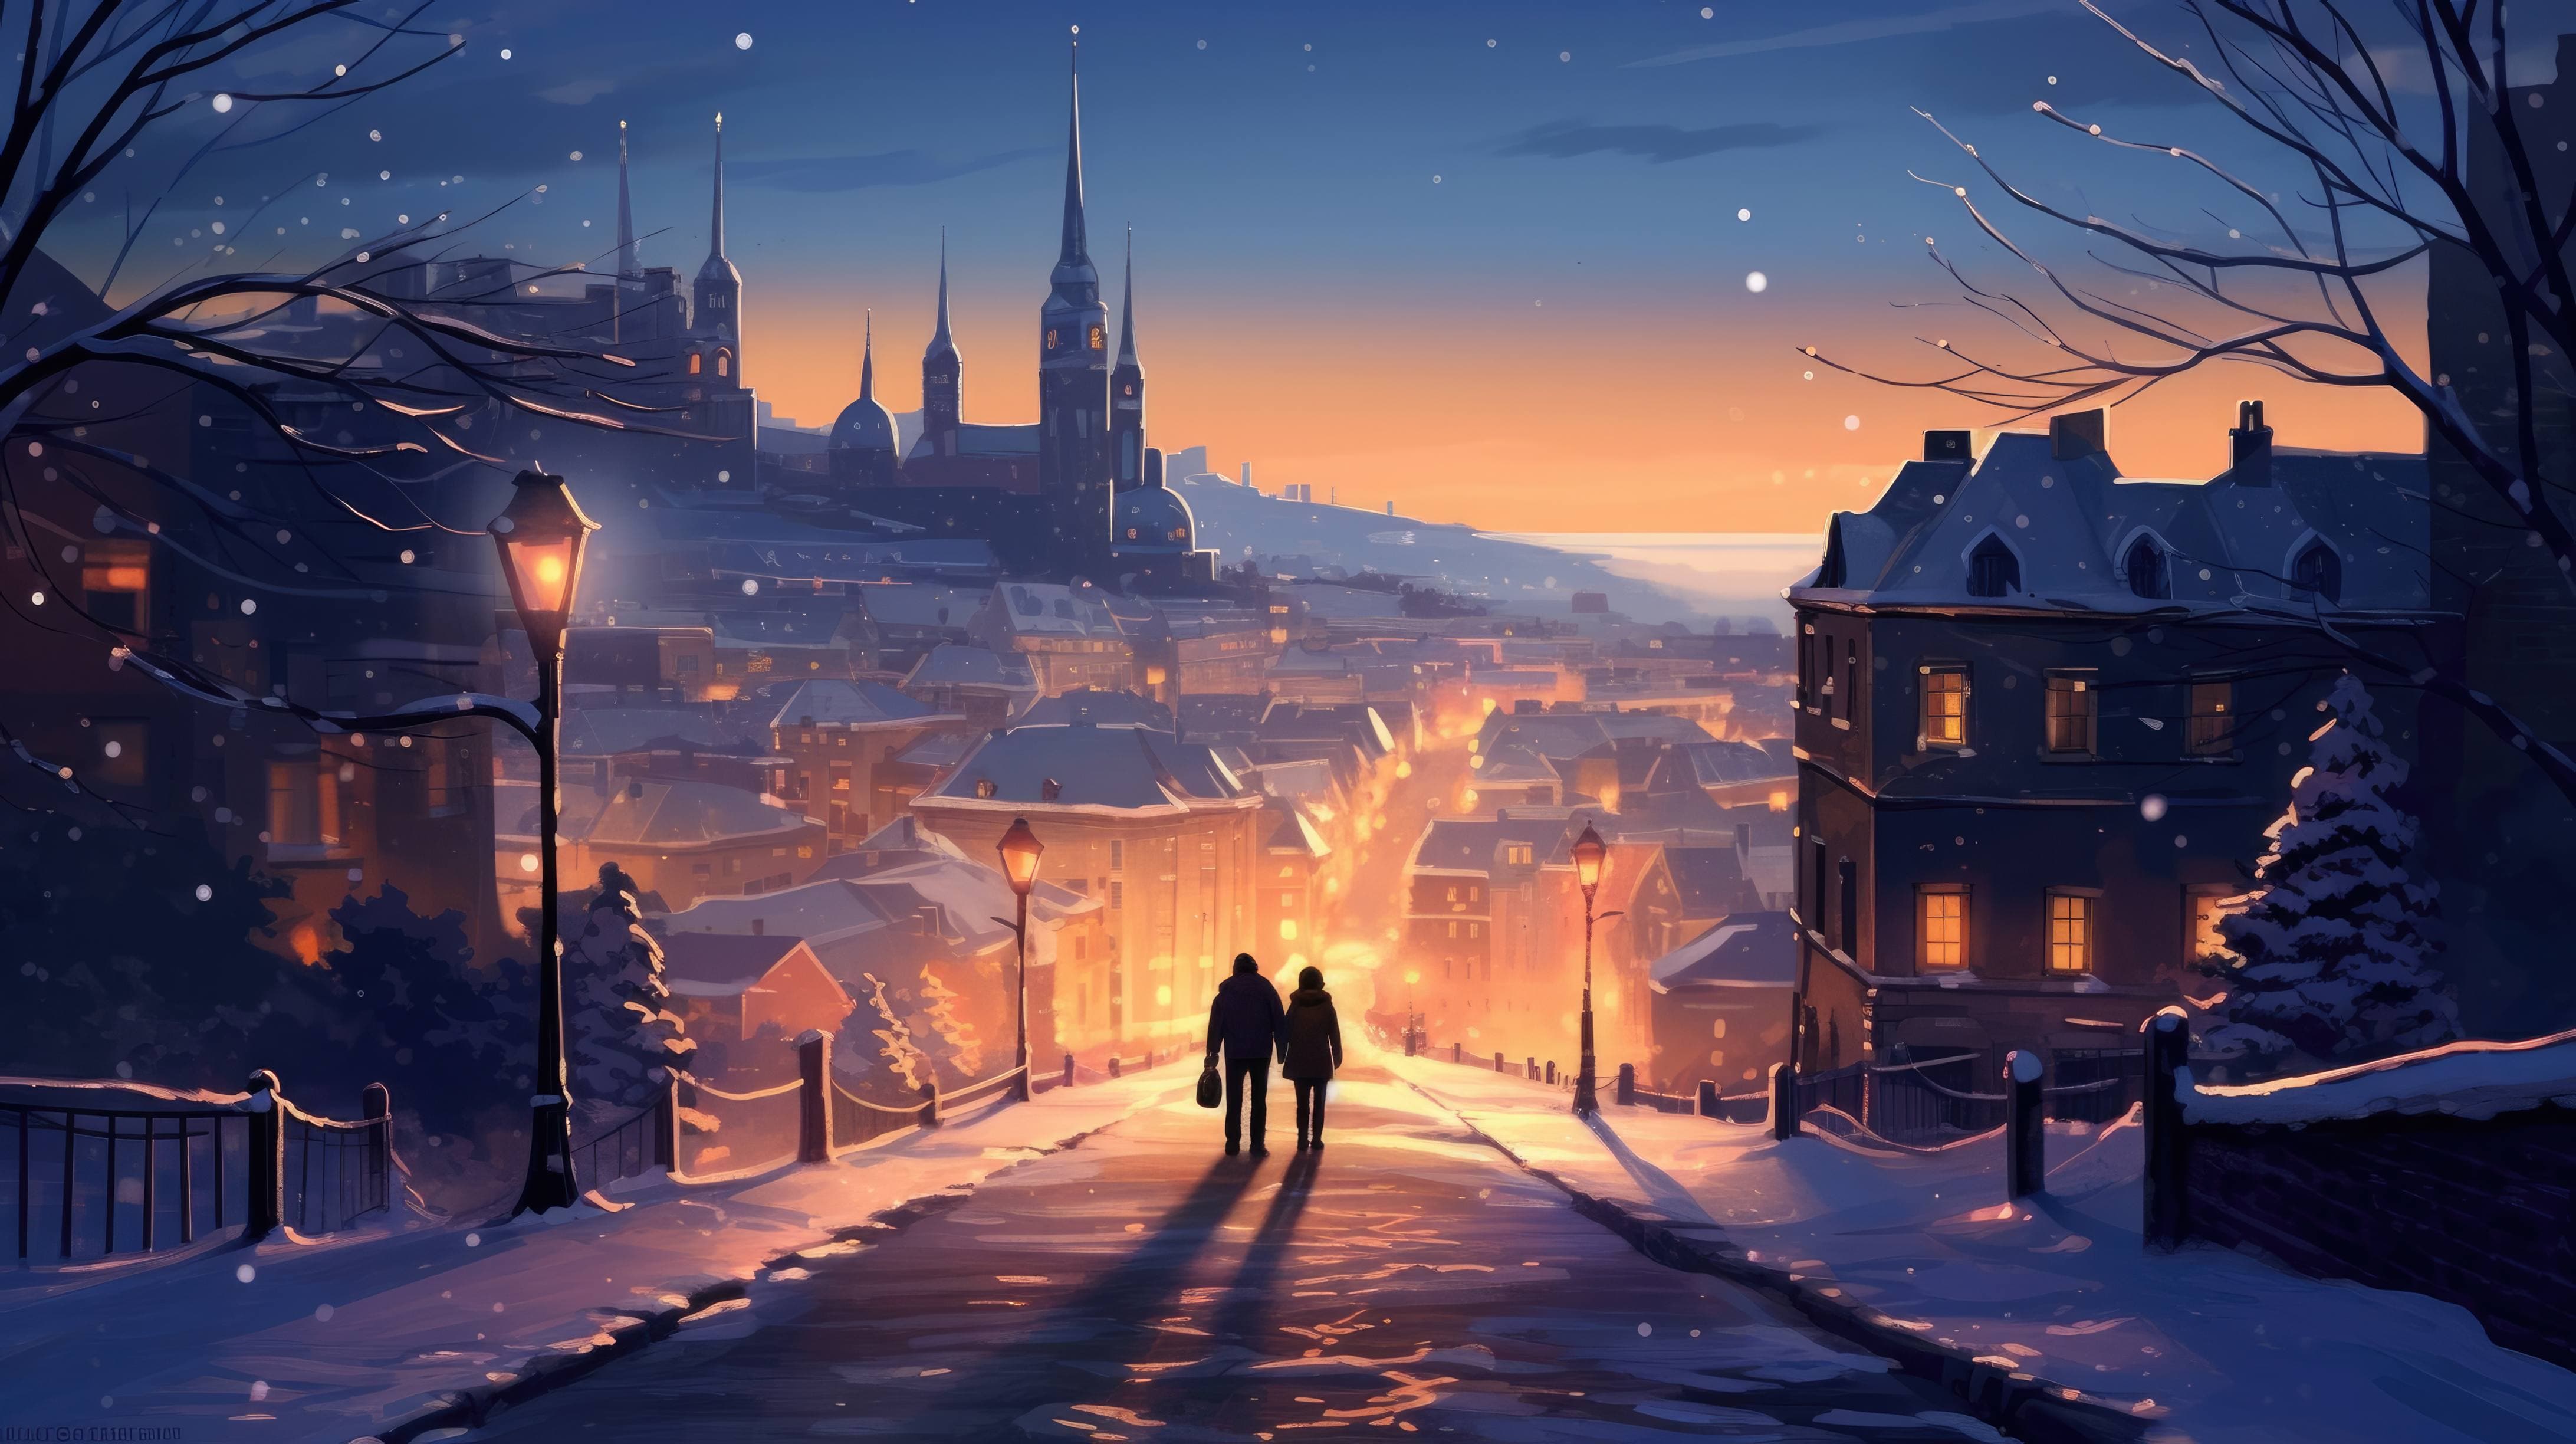 A 4K ultra HD wallpaper depicting a couple walking hand in hand on a snowy street lined with glowing Christmas lights, with a snowy town in the background and a big full